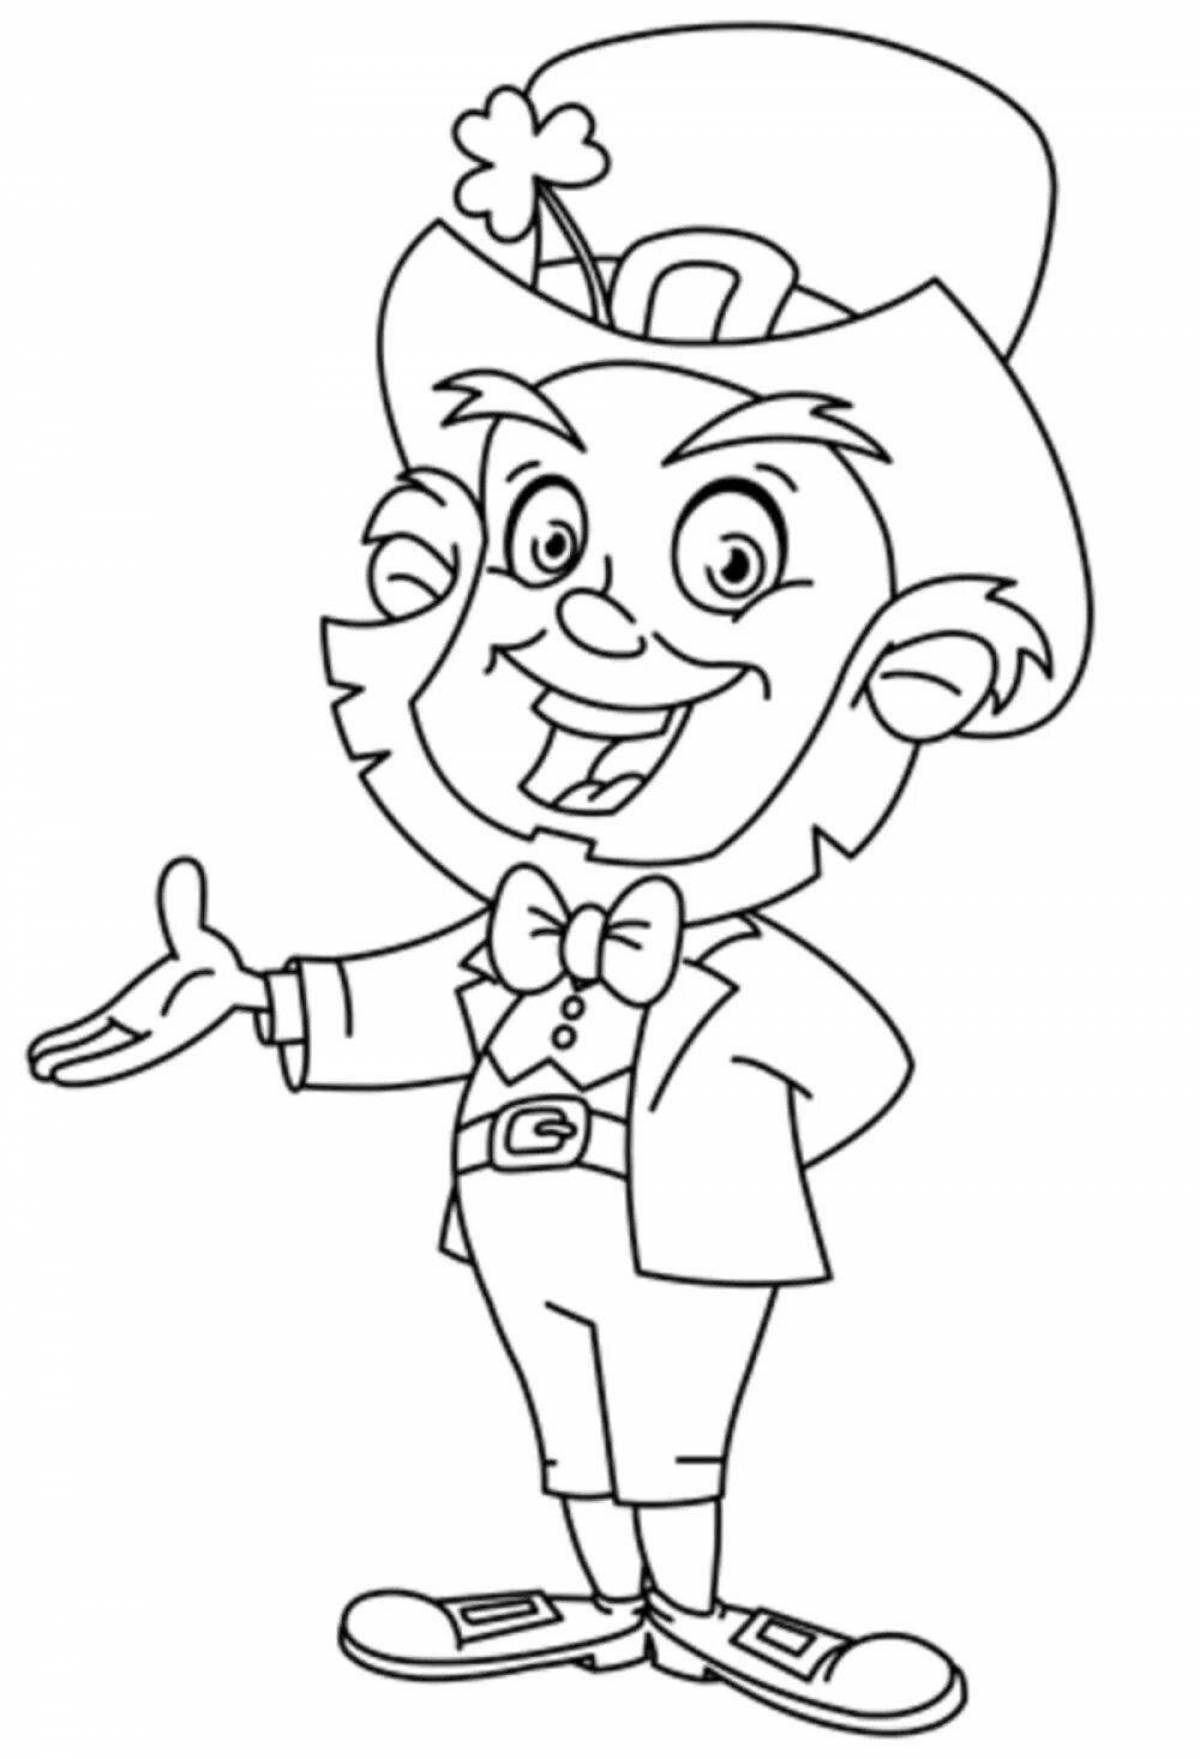 Animated leprechaun coloring page